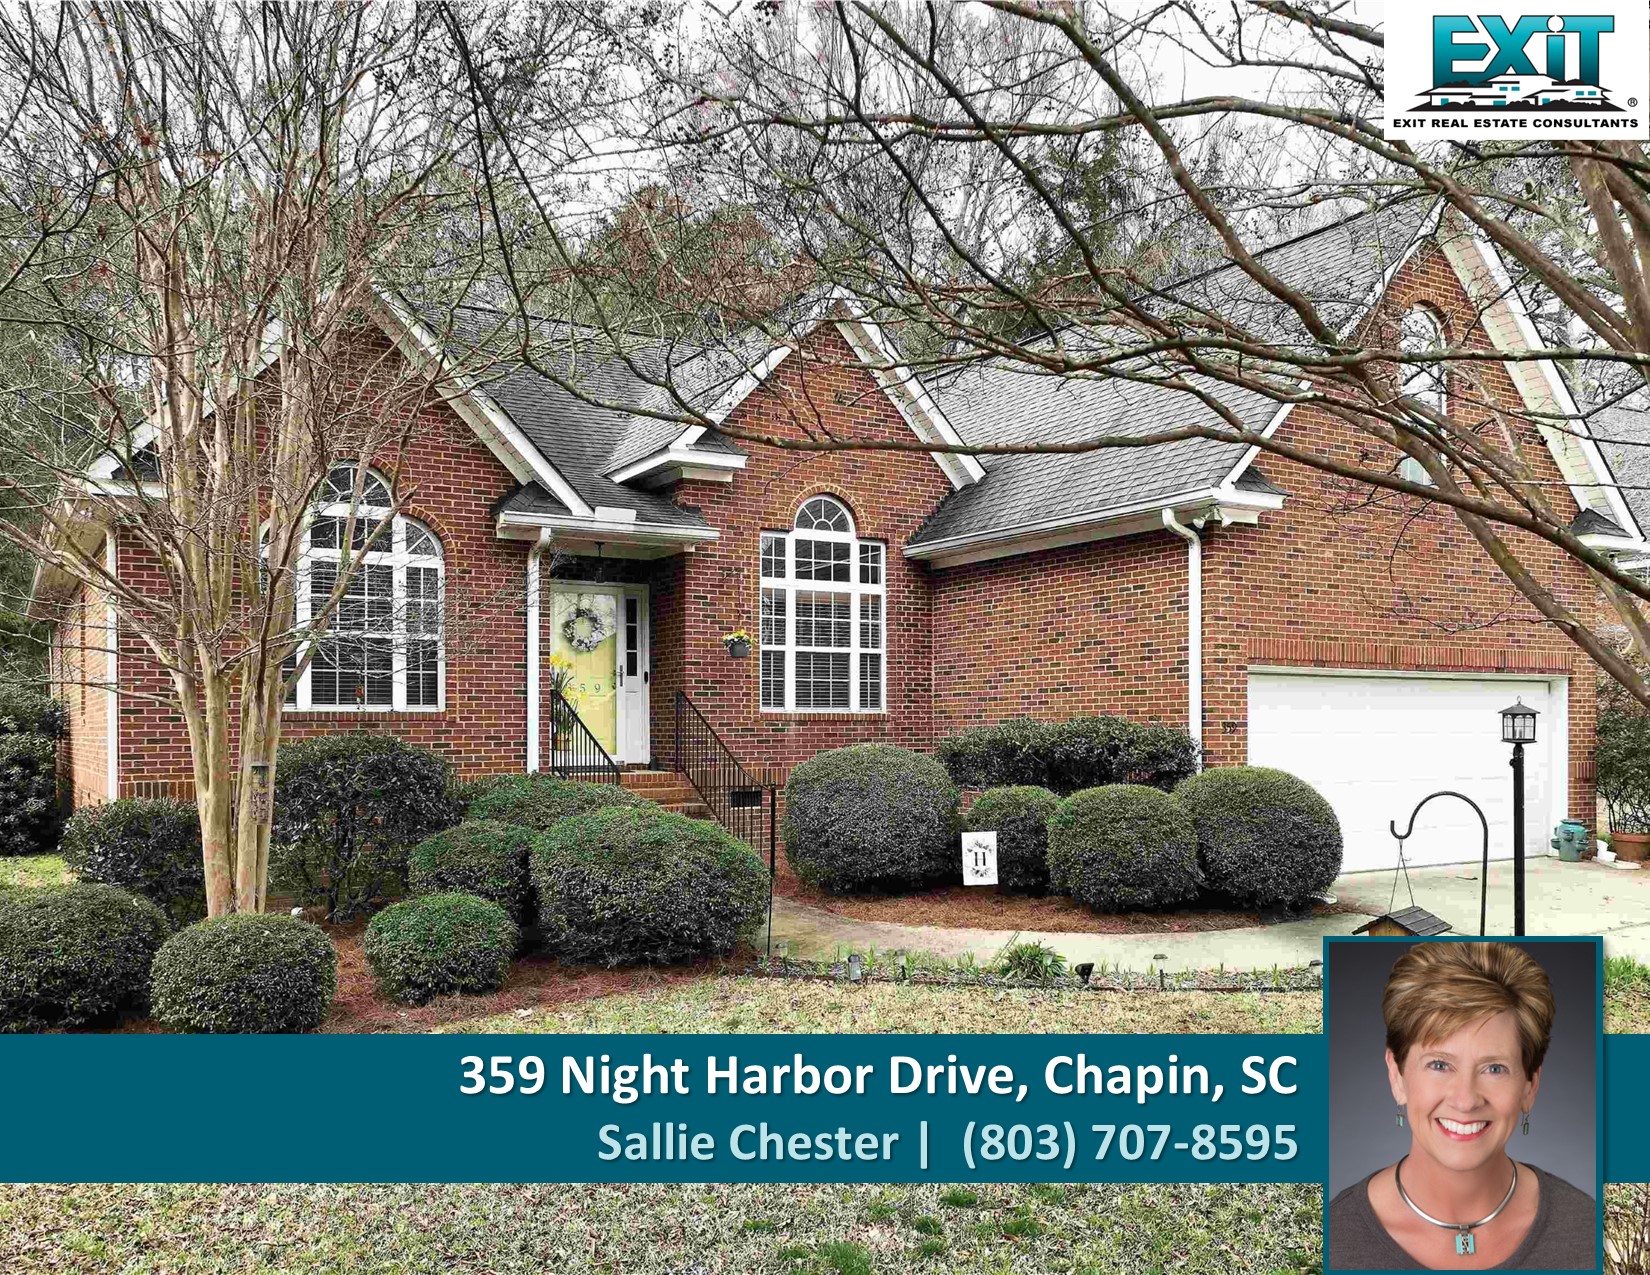 Just listed in Night Harbor - Chapin